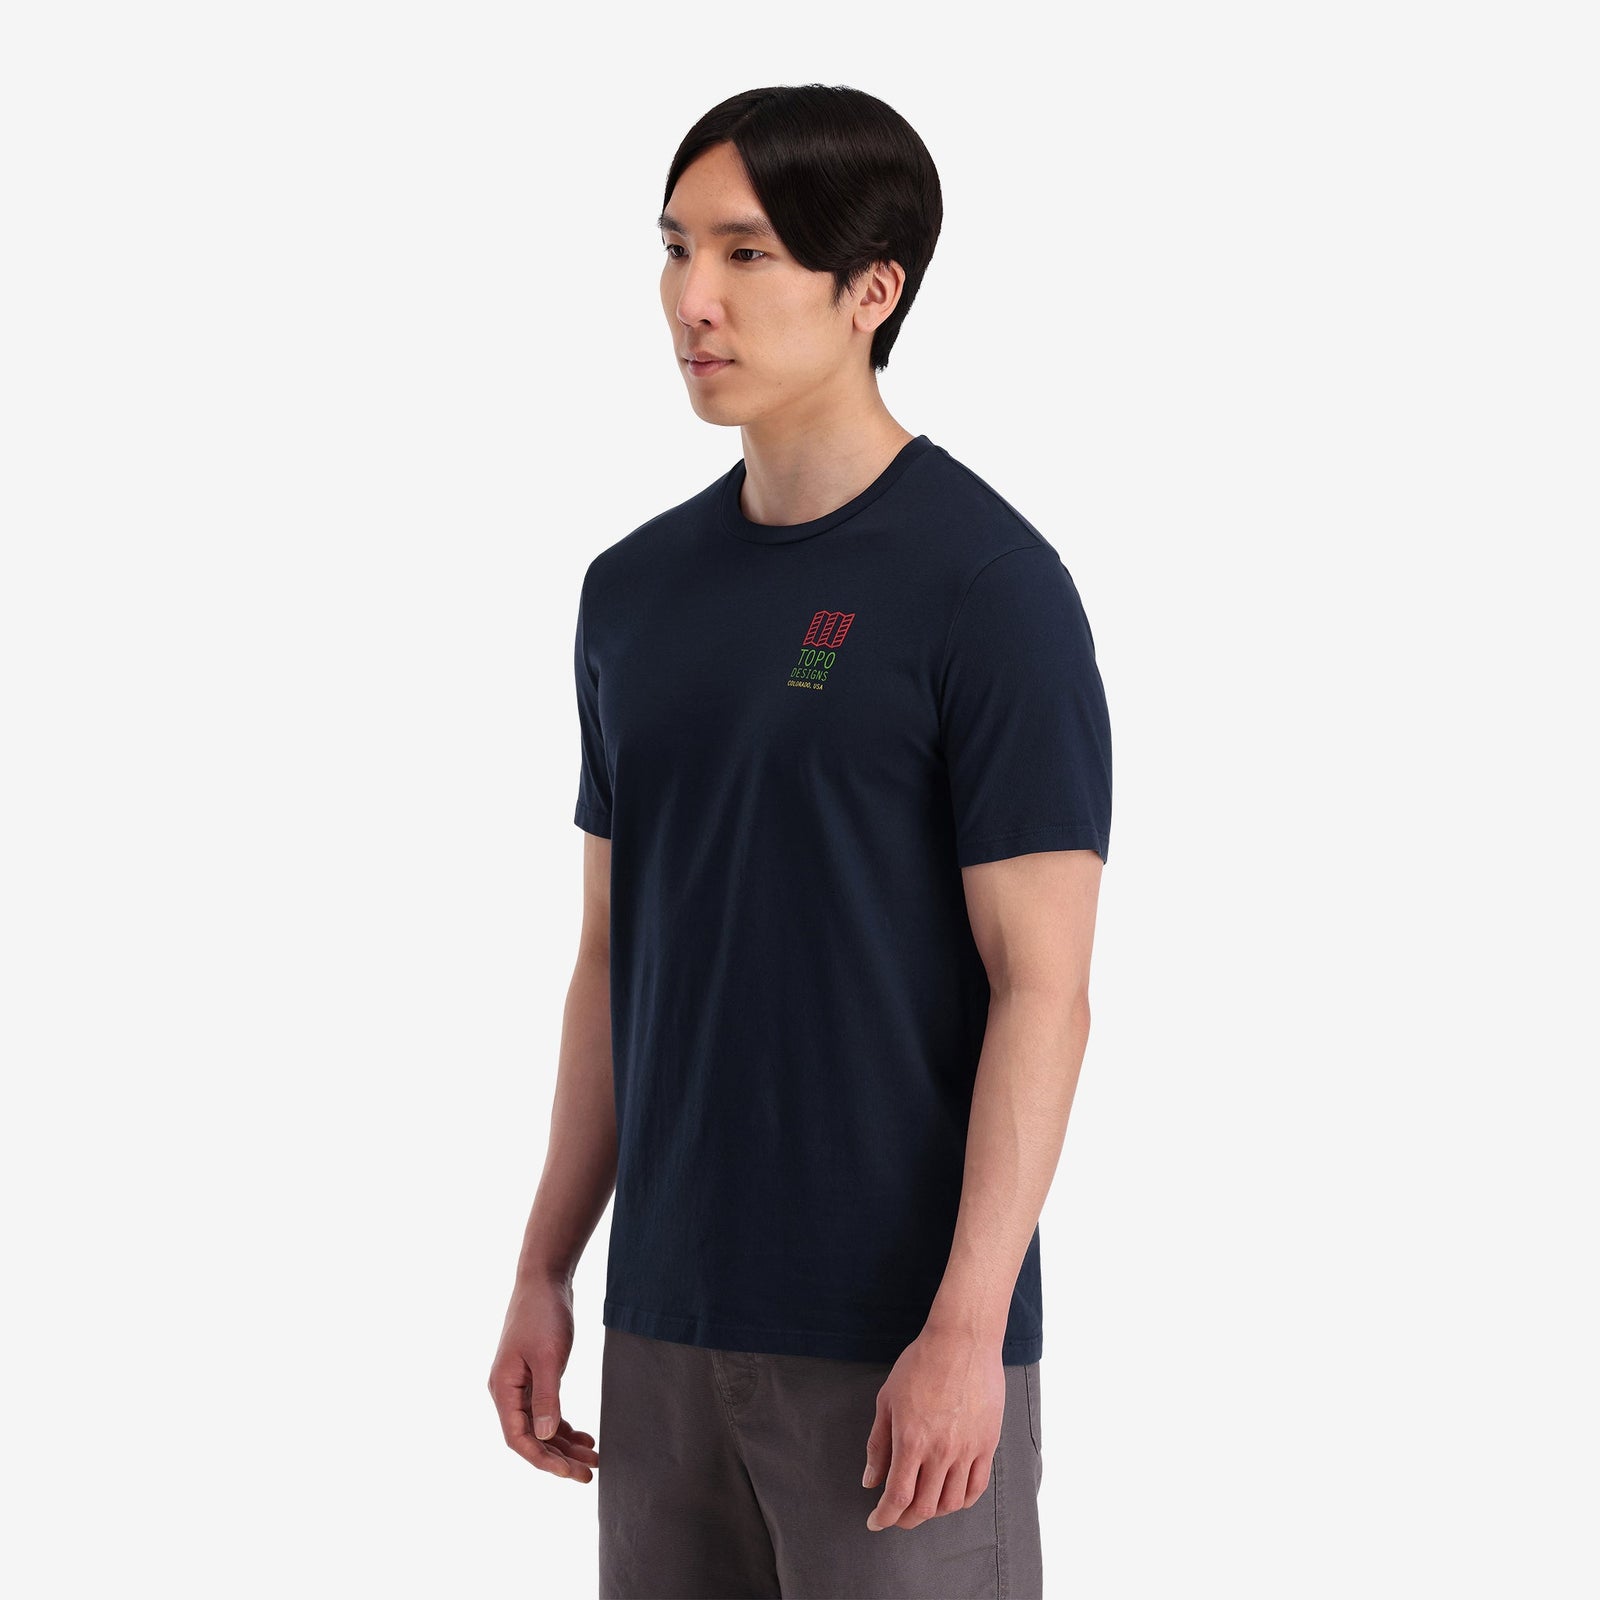 On model left side view of Topo Designs Men's Small Original Logo Tee 100% organic cotton short sleeve graphic logo t-shirt in "navy" blue.